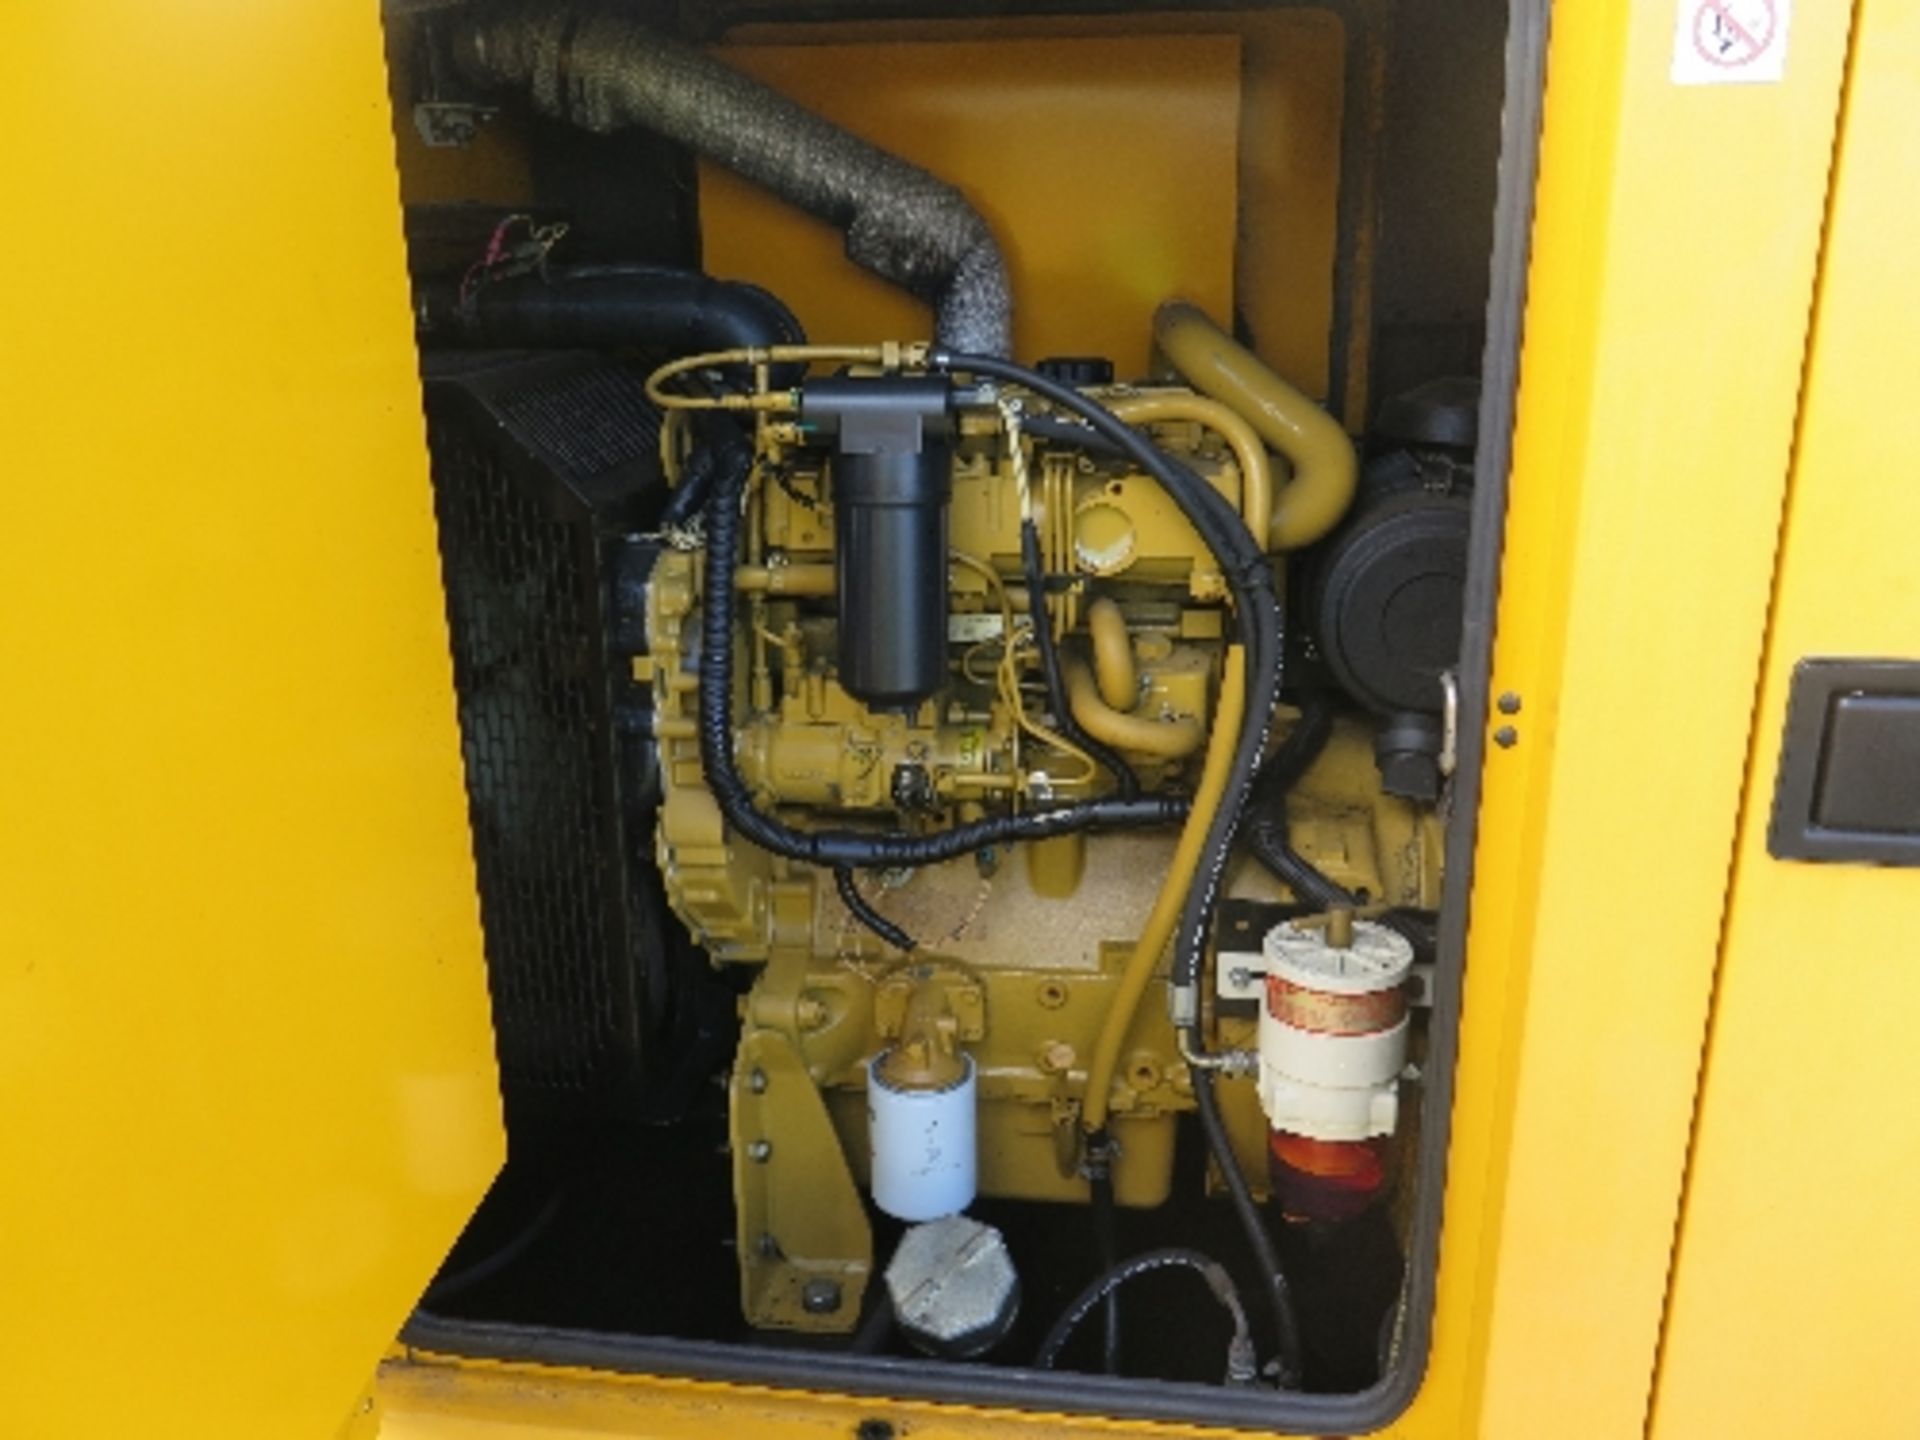 Caterpillar XQE45 generator 21460 hrs 157790
PERKINS - RUNS AND MAKES POWER
ALL LOTS are SOLD AS - Image 3 of 6